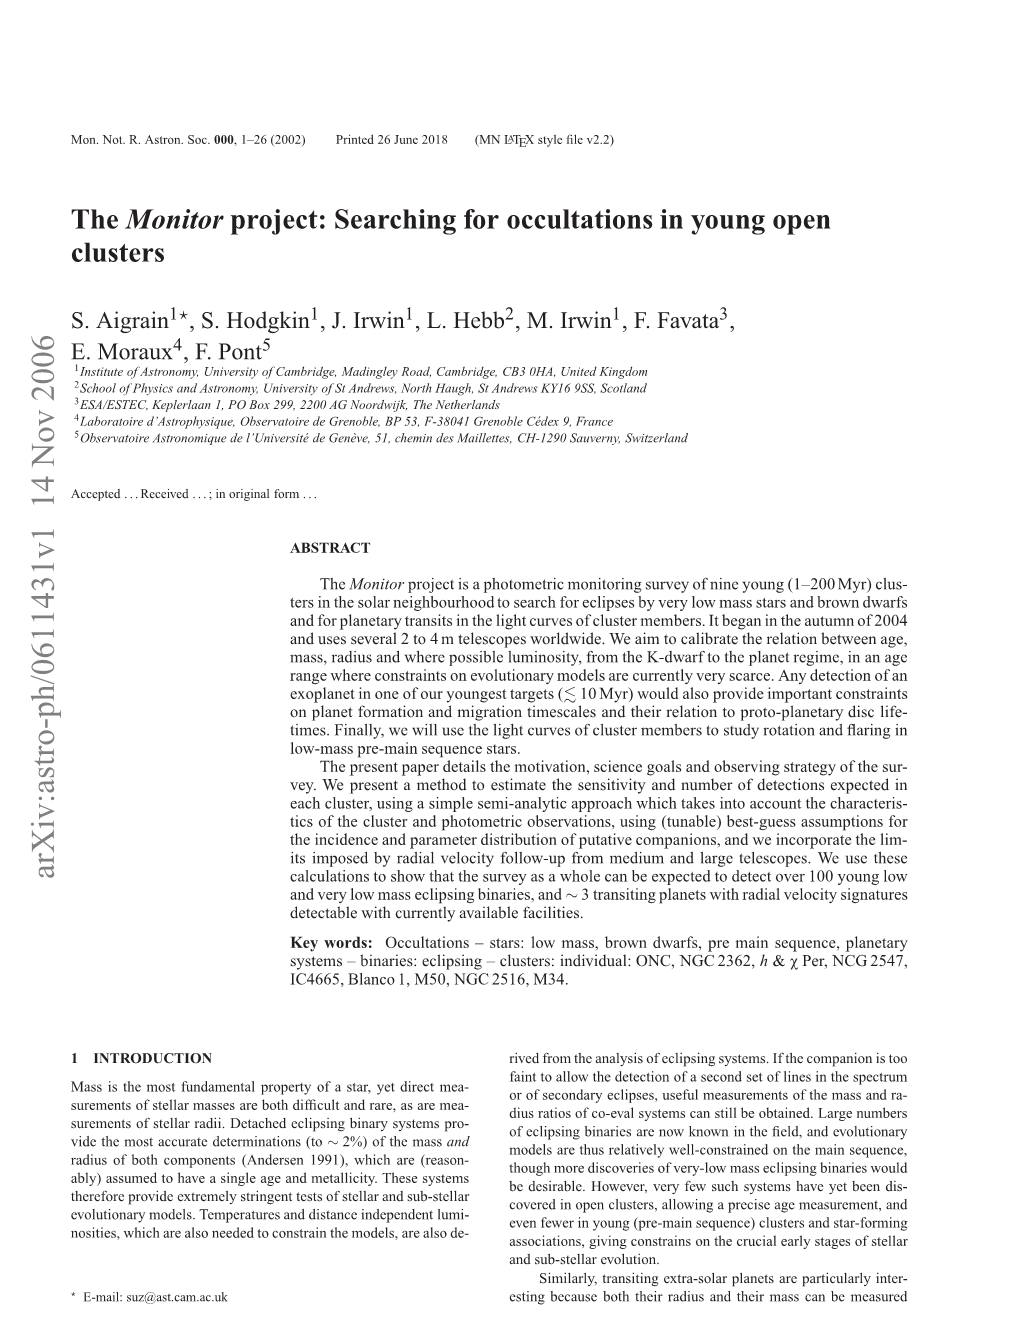 The Monitor Project: Searching for Occultations in Young Open Clusters